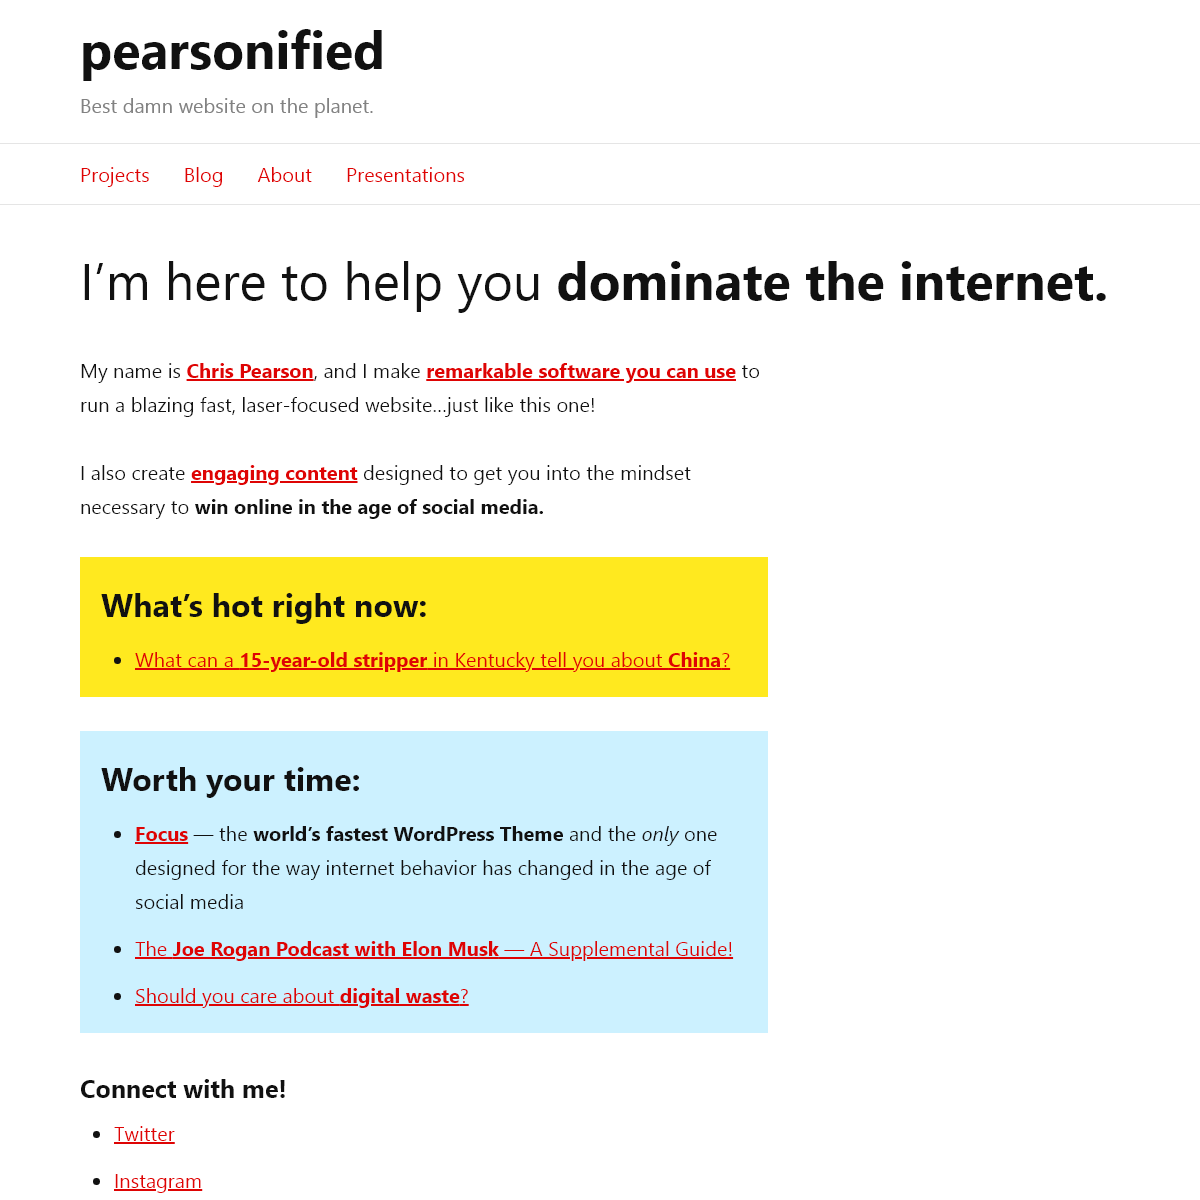 A complete backup of pearsonified.com